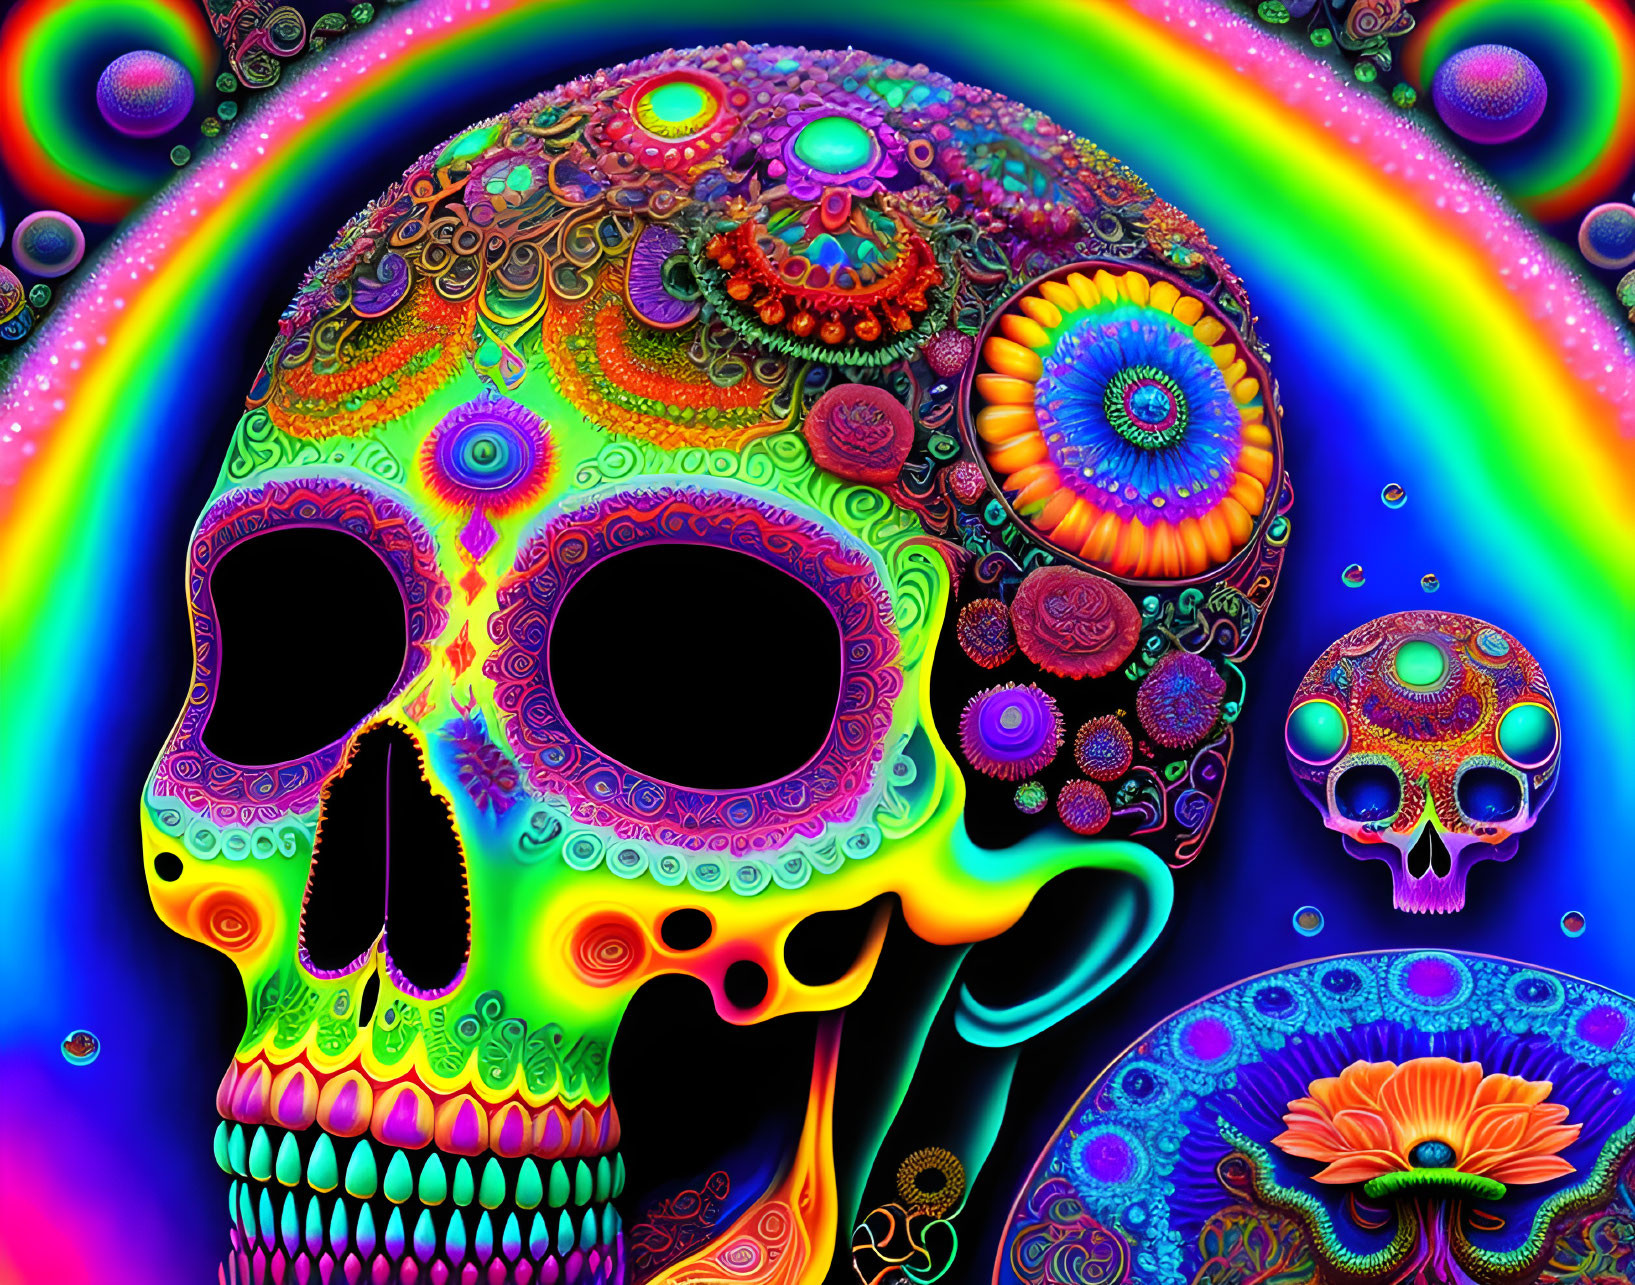 Psychedelic day of the dead skull